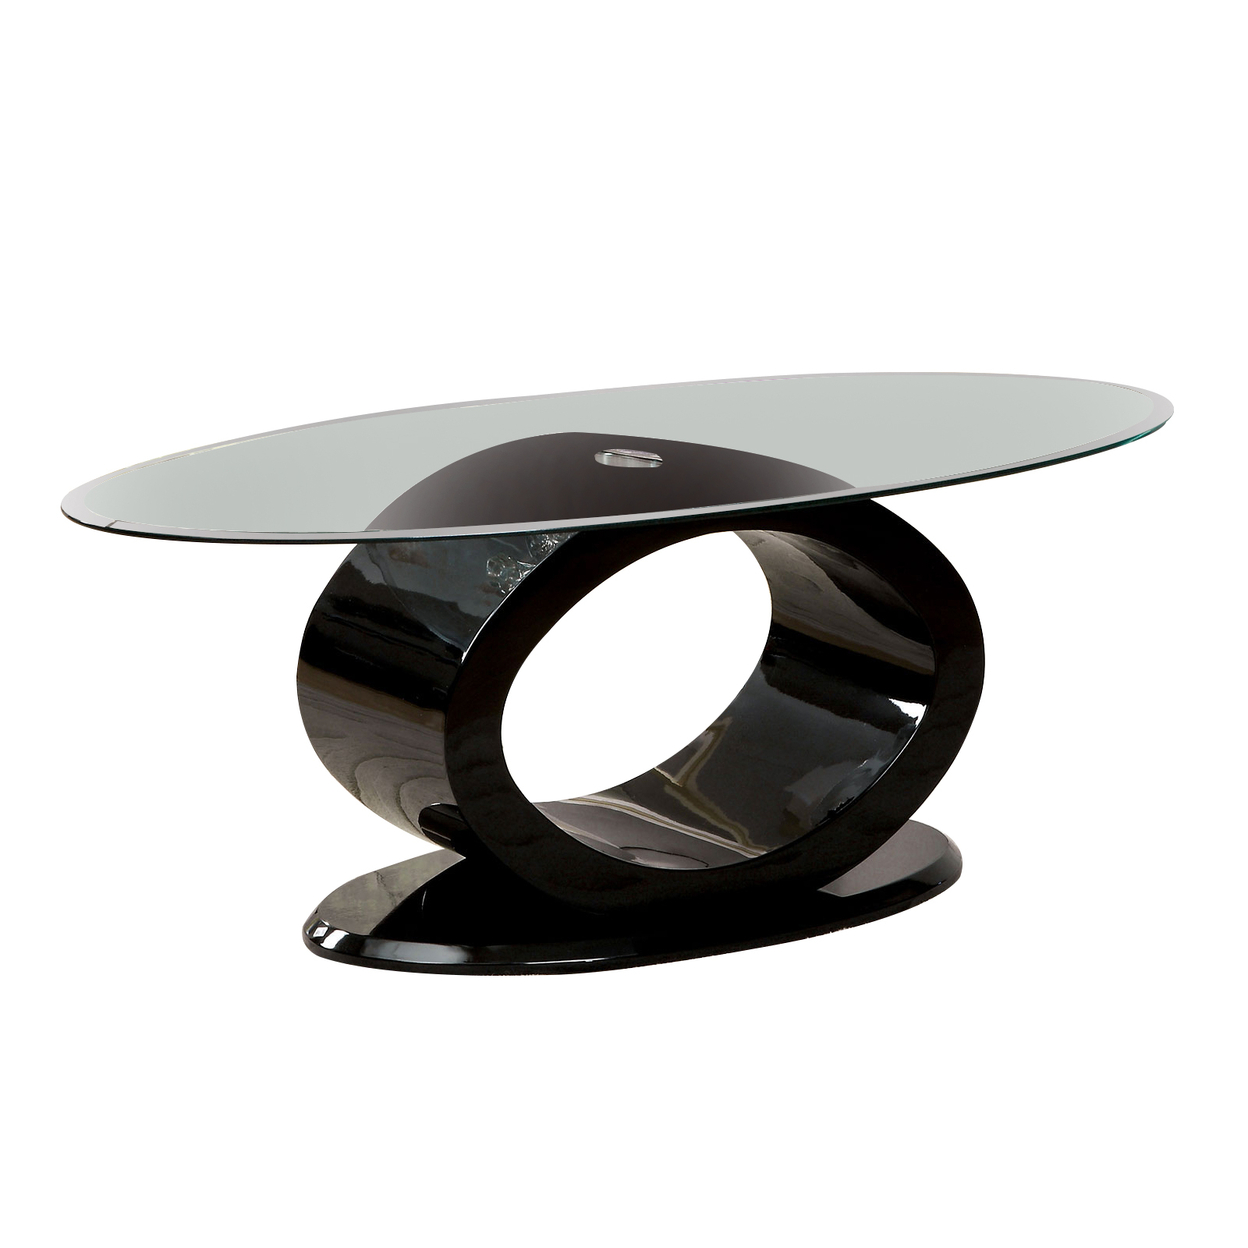 Contemporary Tempered Glass Top Coffee Table With O Shape Base, Black- Saltoro Sherpi